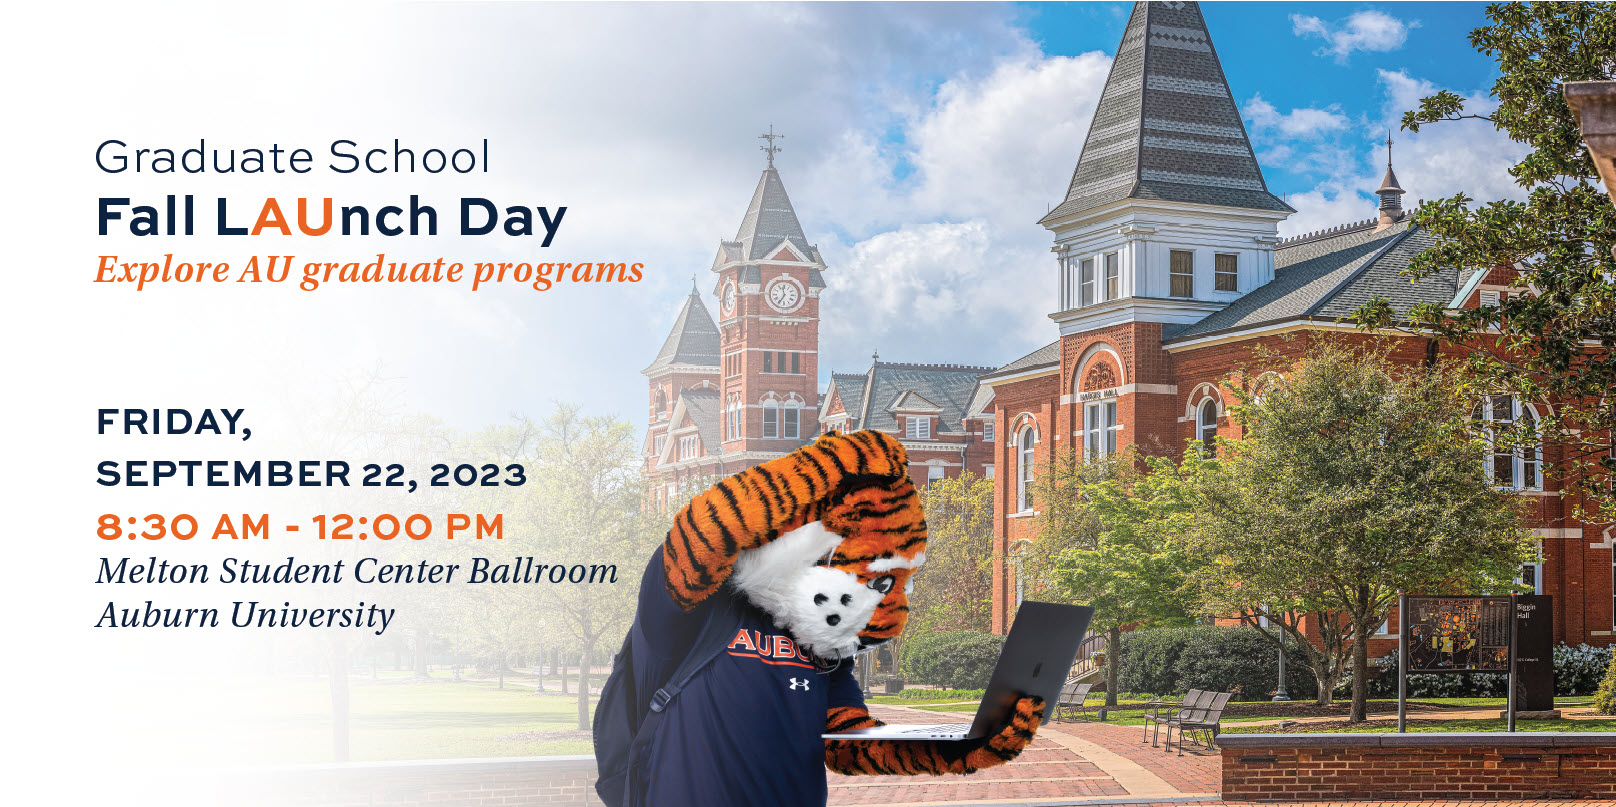 Fall LAUnch Day banner with Aubie considering graduate school options while looking at a laptop in front of Hargis Hall on the AU campus. Event is Friday, September 22, 2023 from 8:30 a.m. - 12:00 p.m. in the Melton Student Center Ballroom on the Auburn University campus.